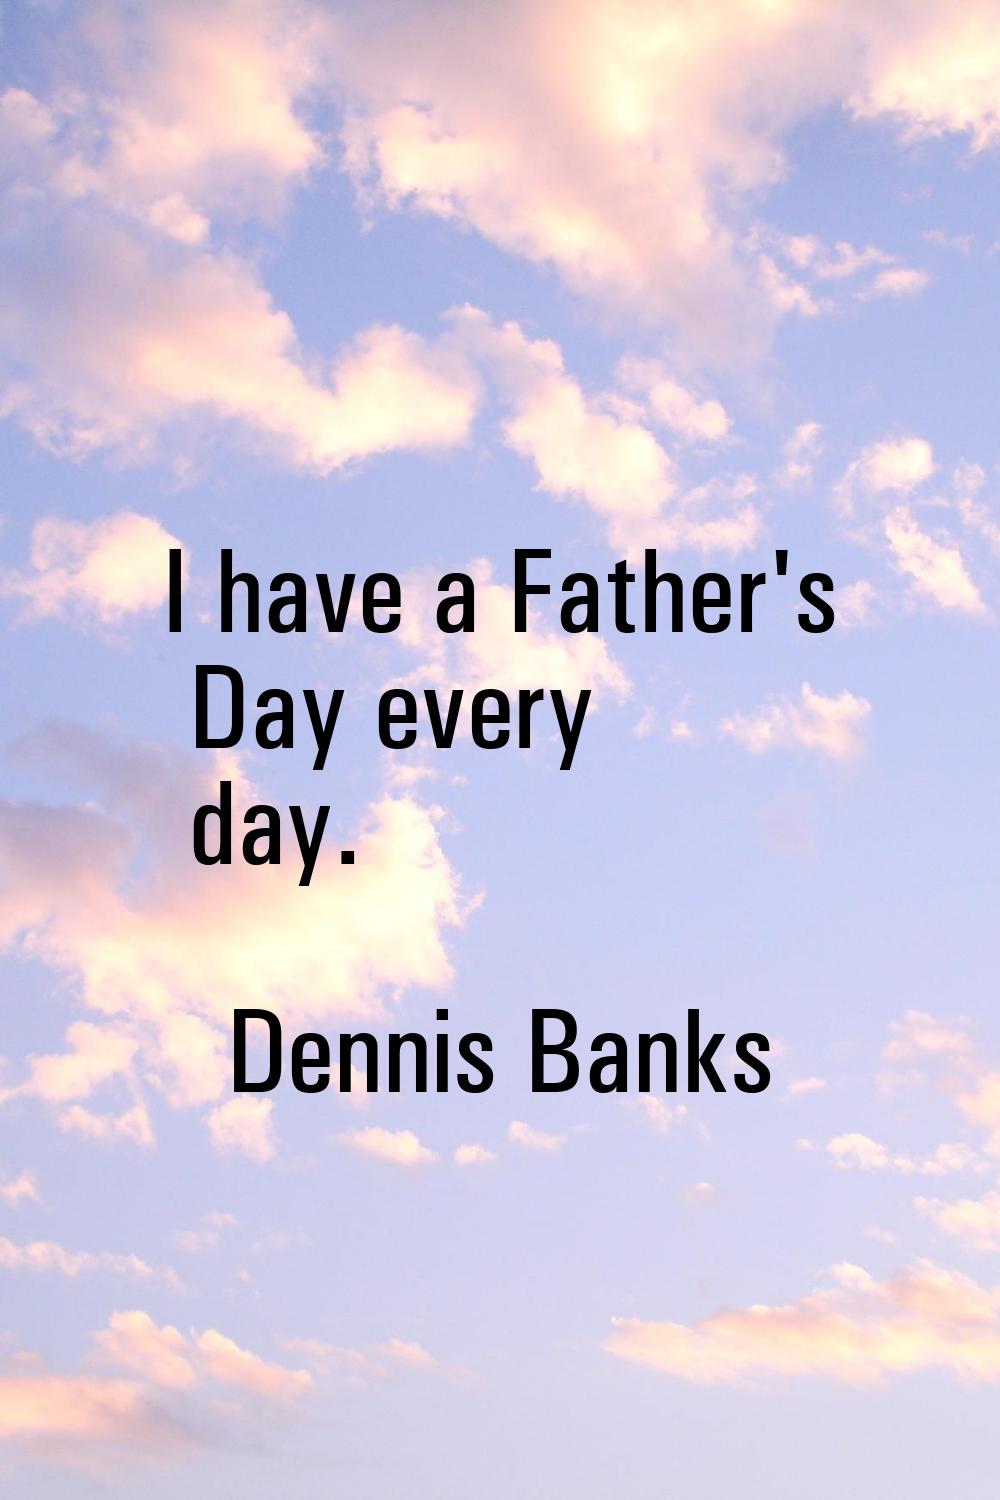 I have a Father's Day every day.